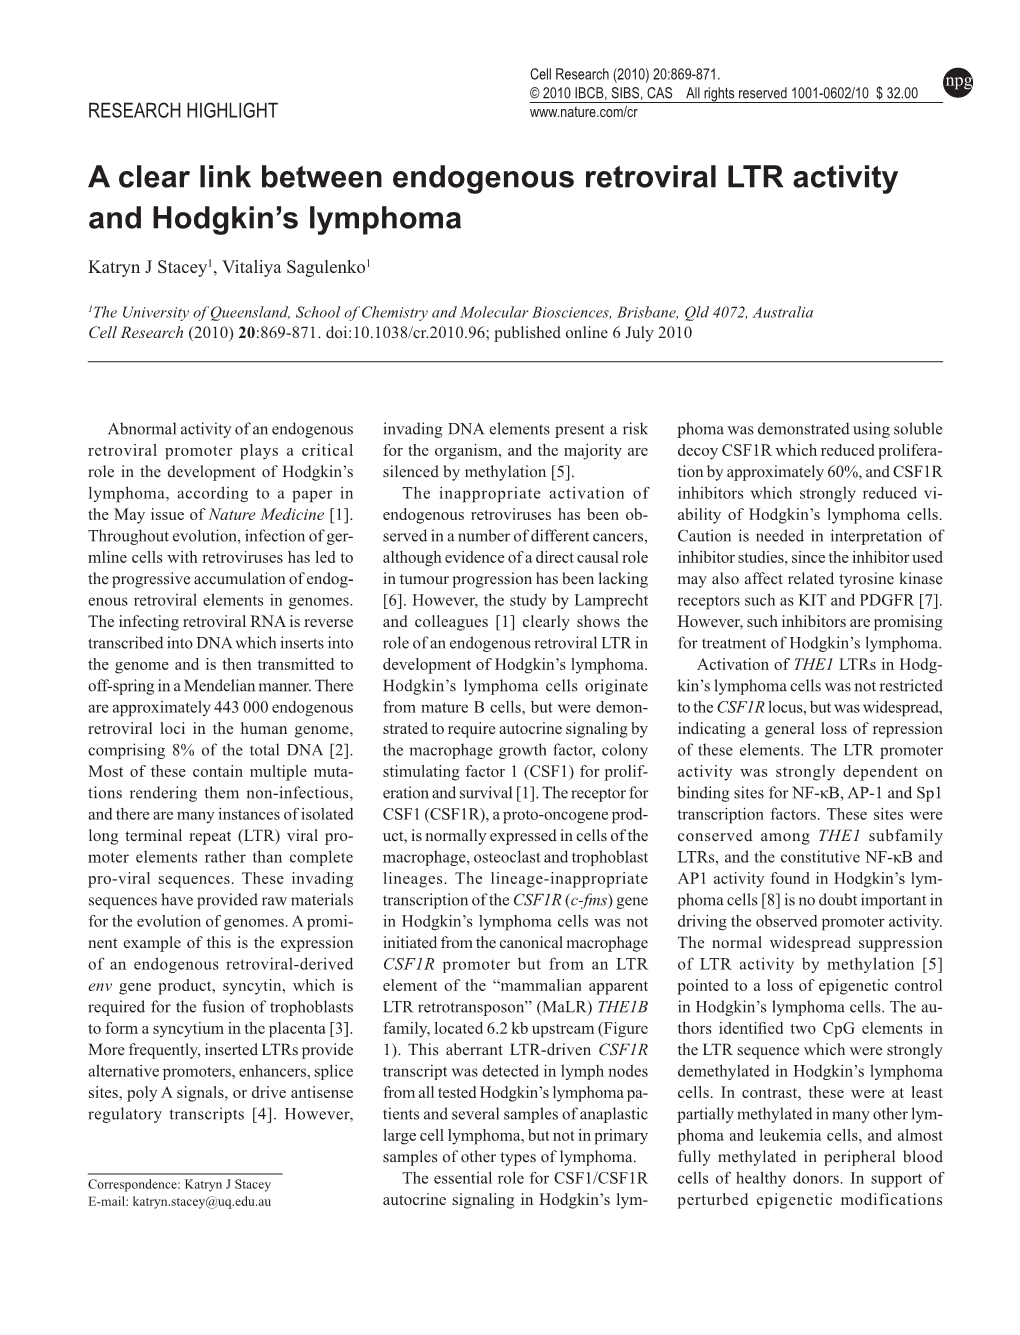 A Clear Link Between Endogenous Retroviral LTR Activity and Hodgkin's Lymphoma